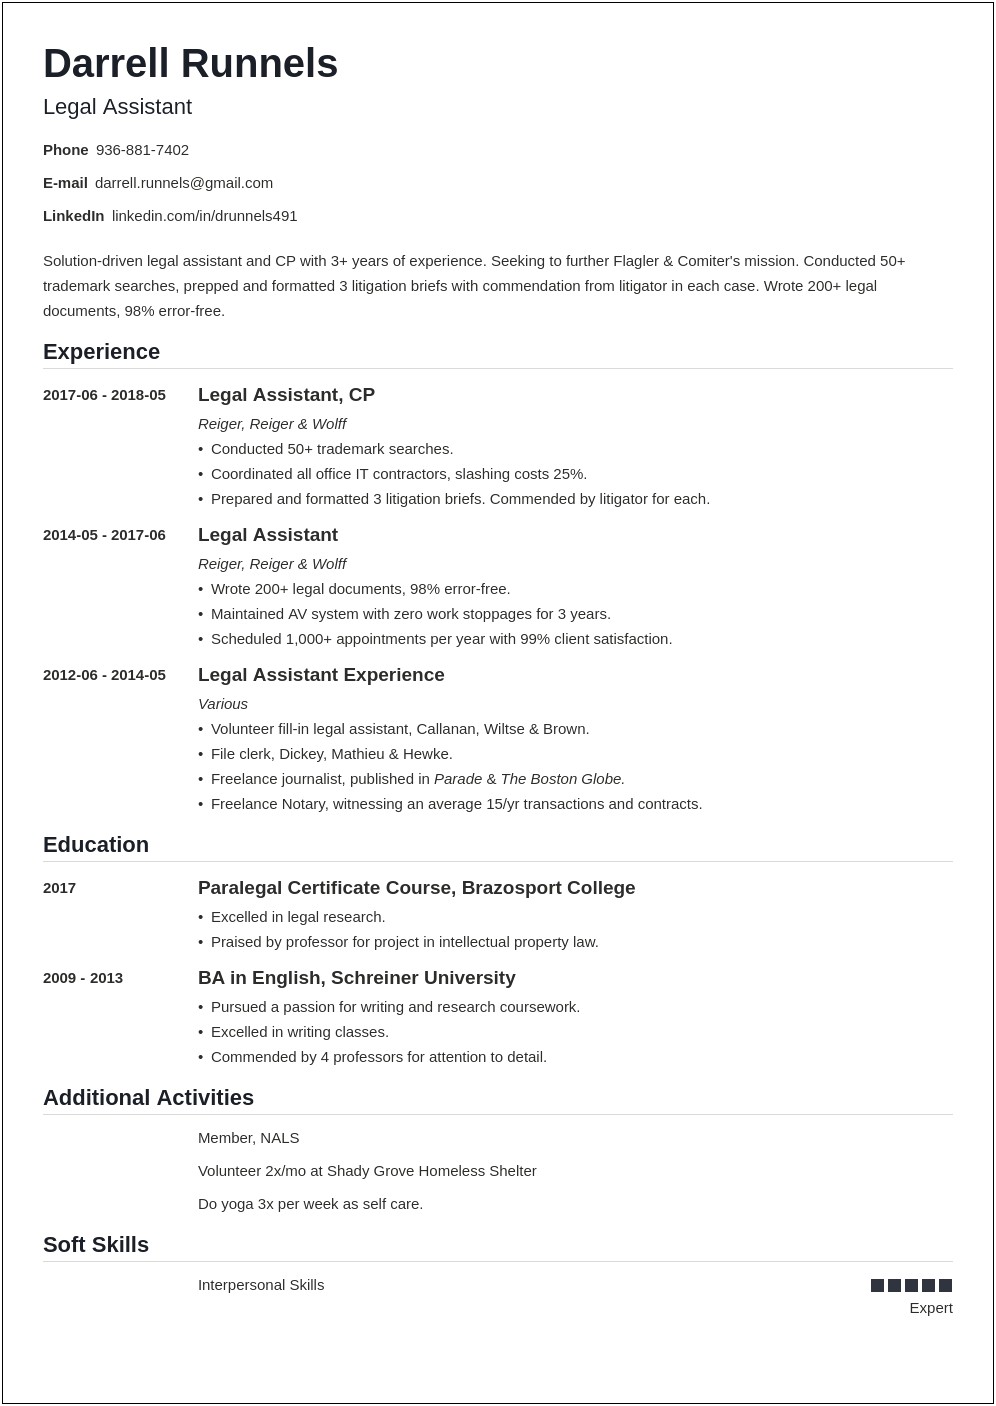 Resume Sample For Immigration Paralegal